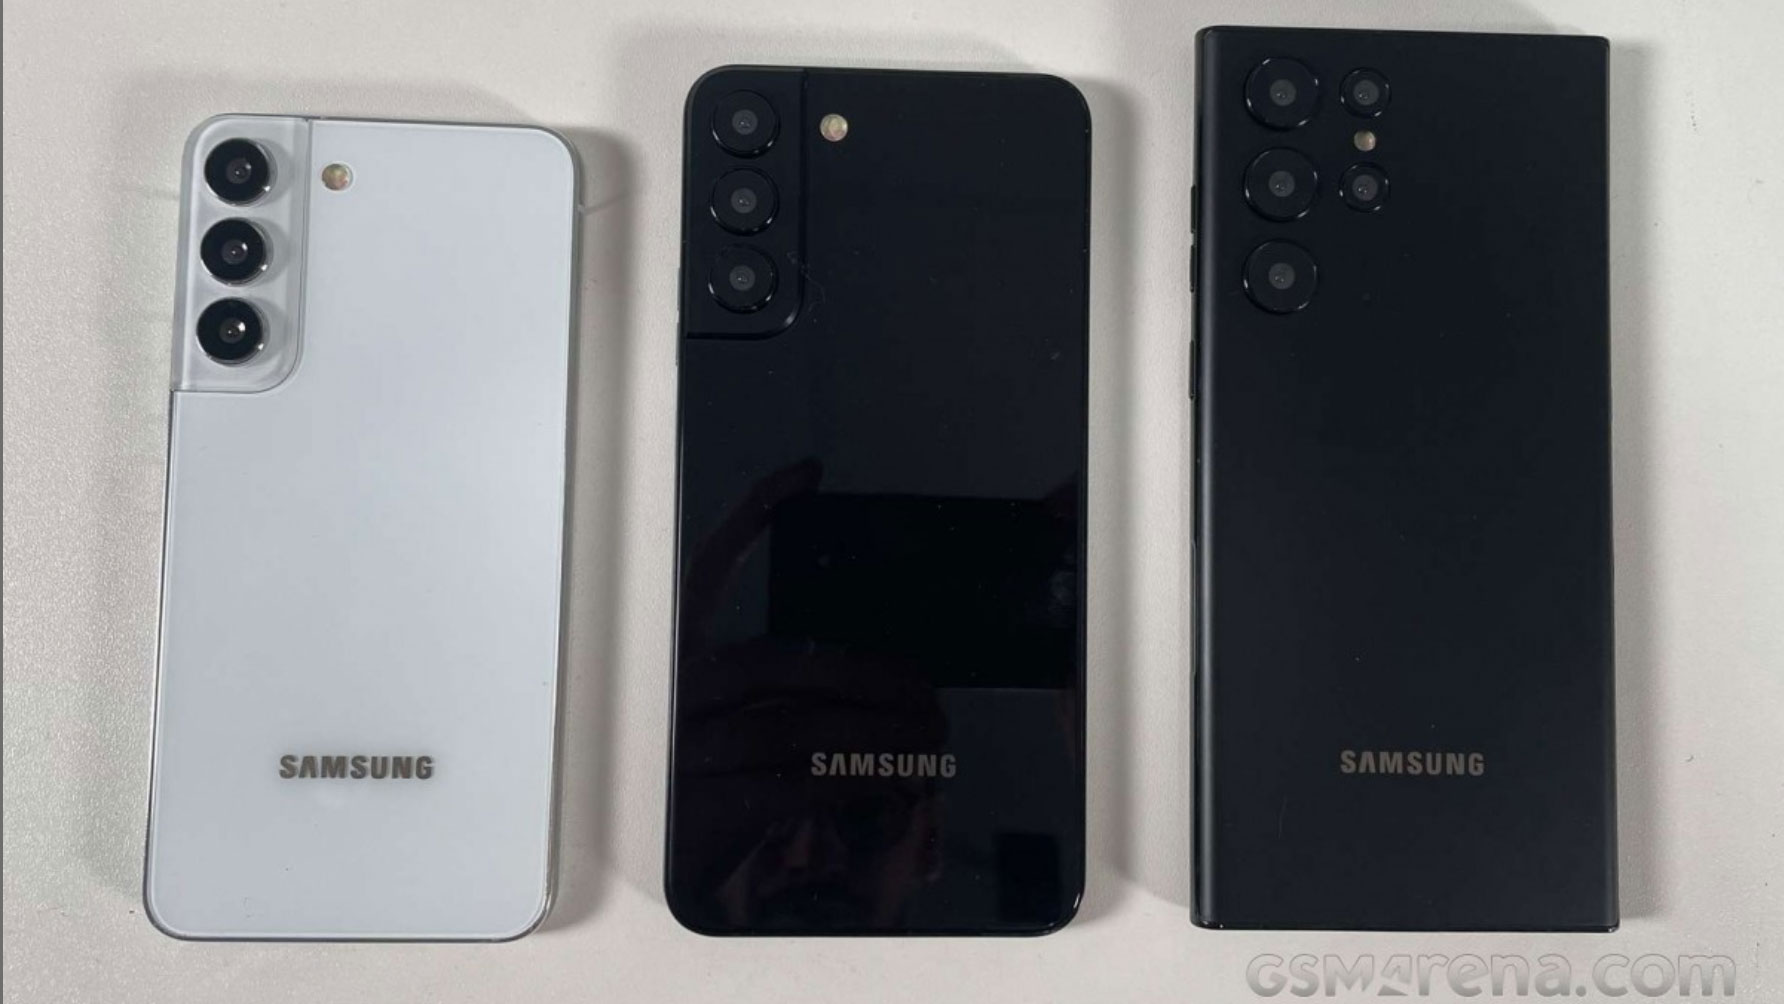 Samsung Galaxy S22 leaked images